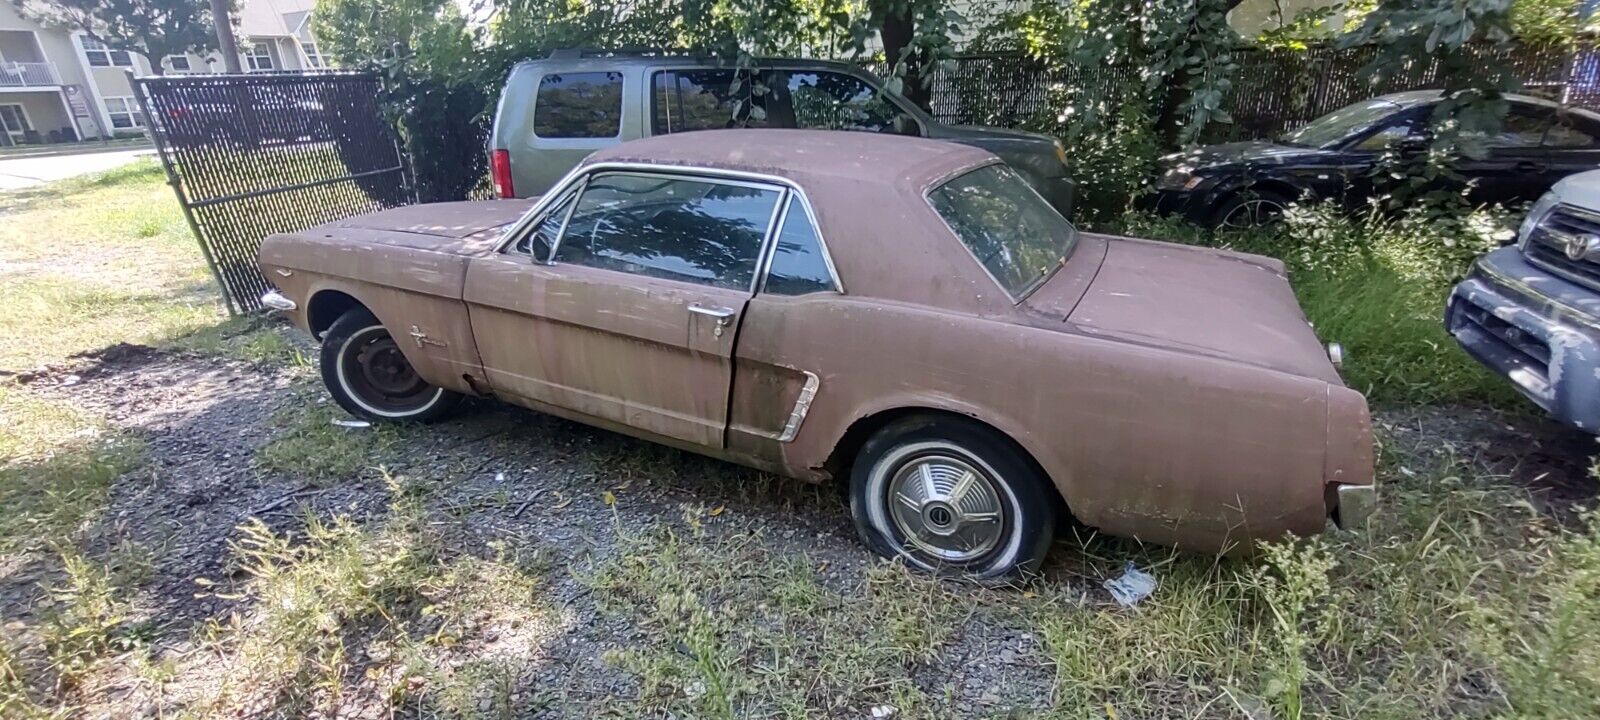 This Abandoned 1965 Mustang Looks More Compelling Than the Entire ...